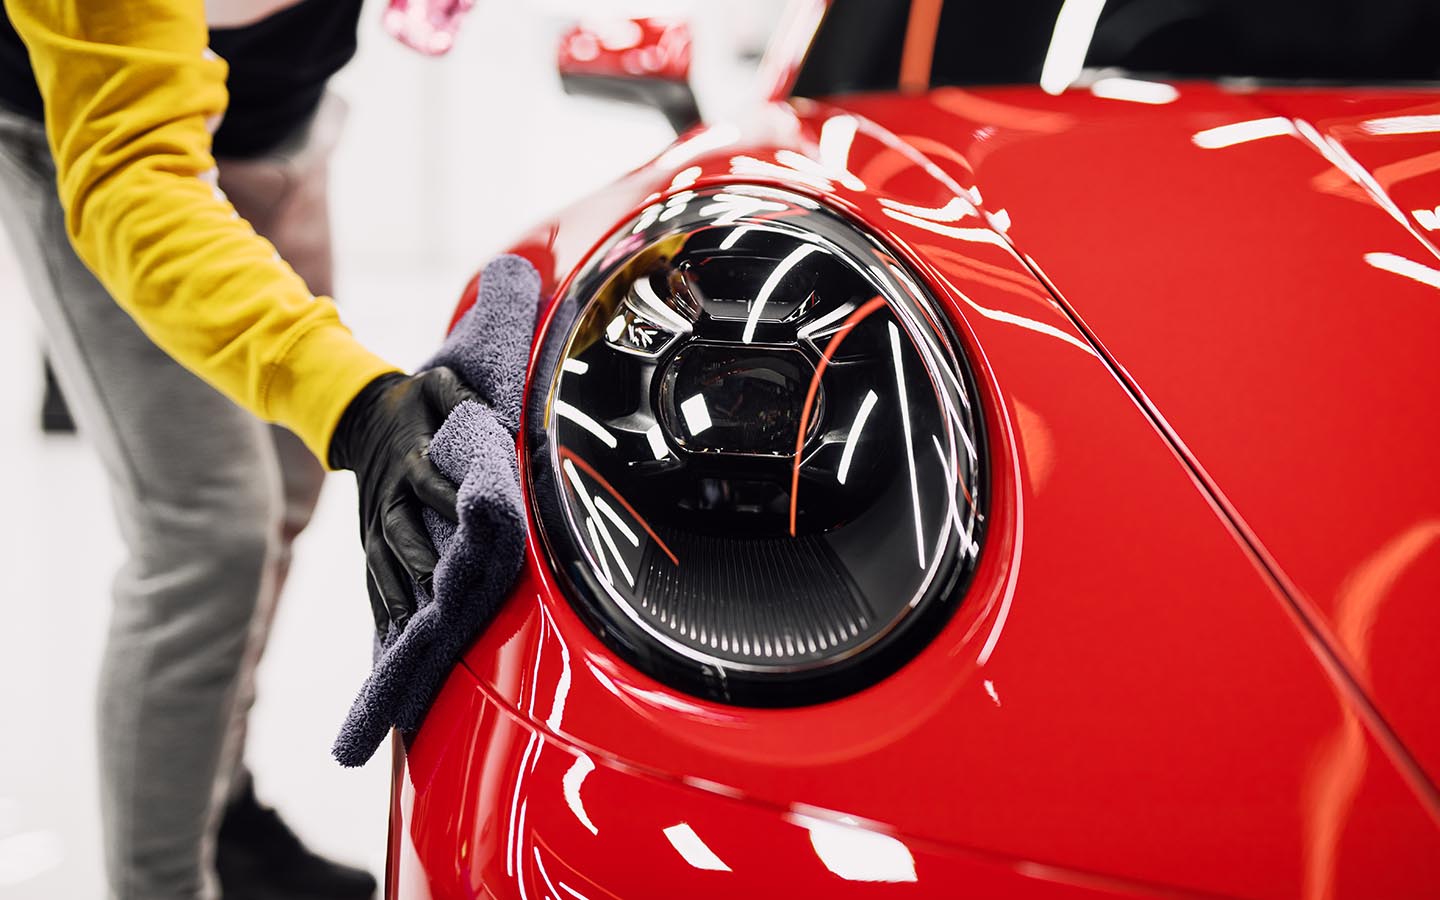 an integral part of headlight maintenance tips is to clean them regularly